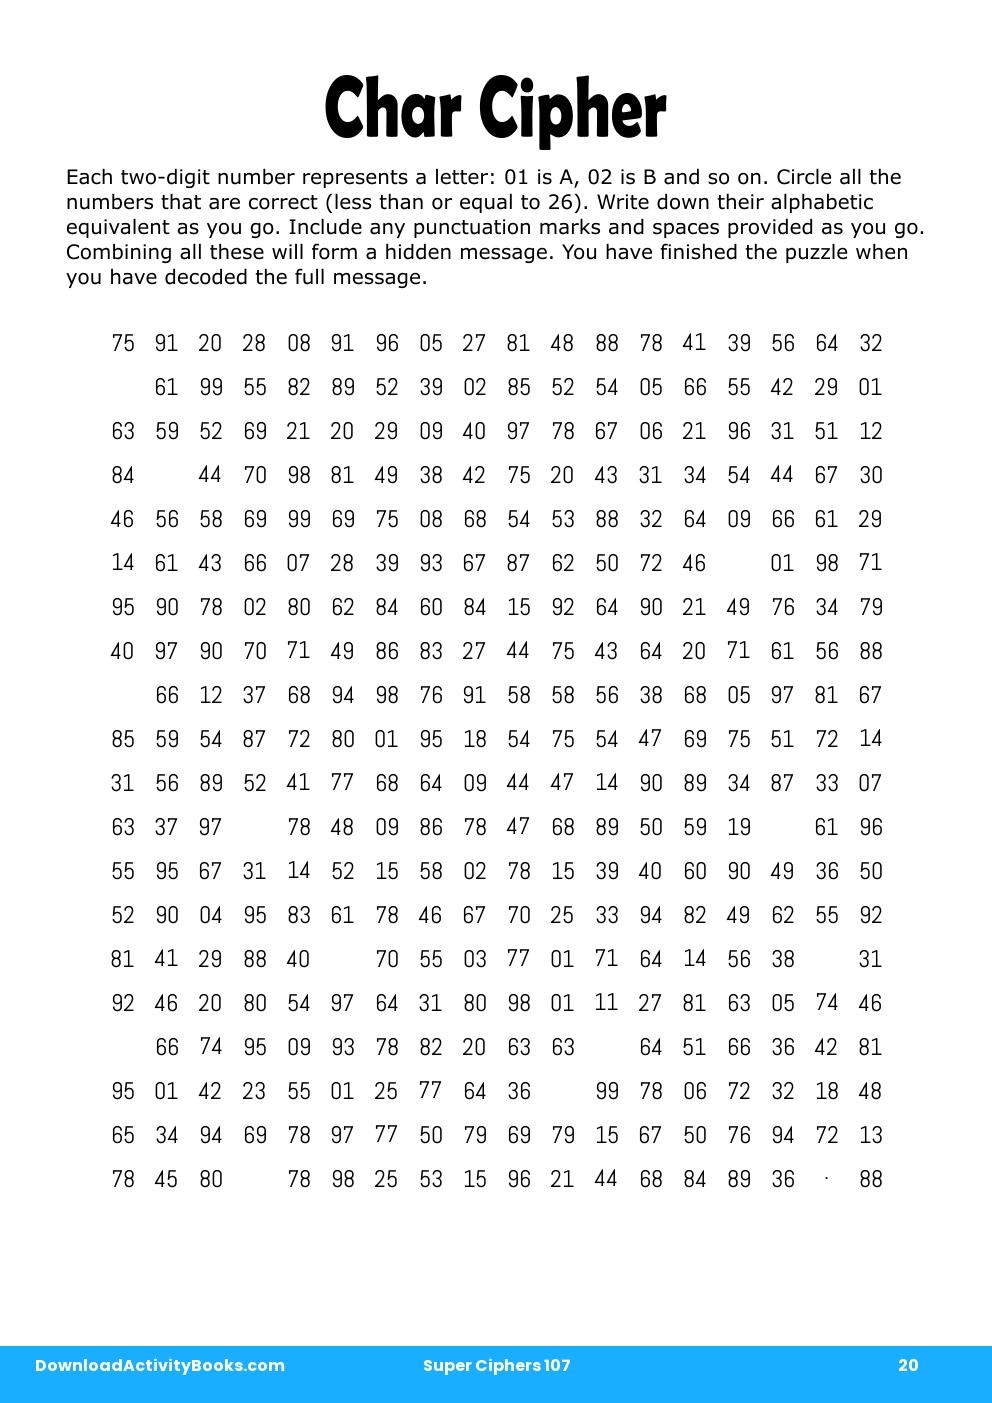 Char Cipher in Super Ciphers 107